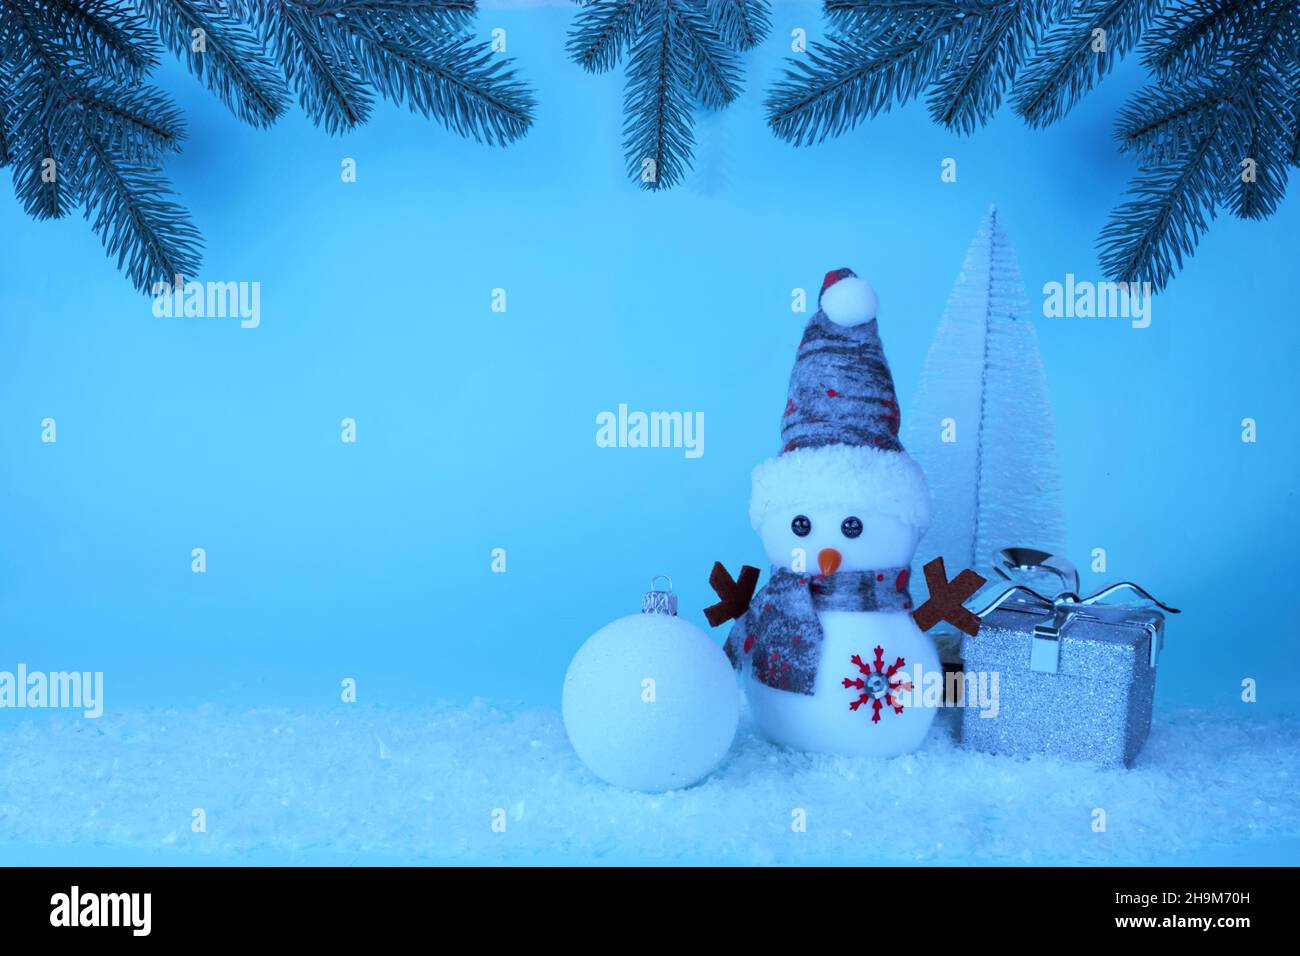 Snowman, gift, Christmas tree, Christmas ball on white snow on a blue background with Christmas tree branches and garlands. Christmas New Year card Stock Photo